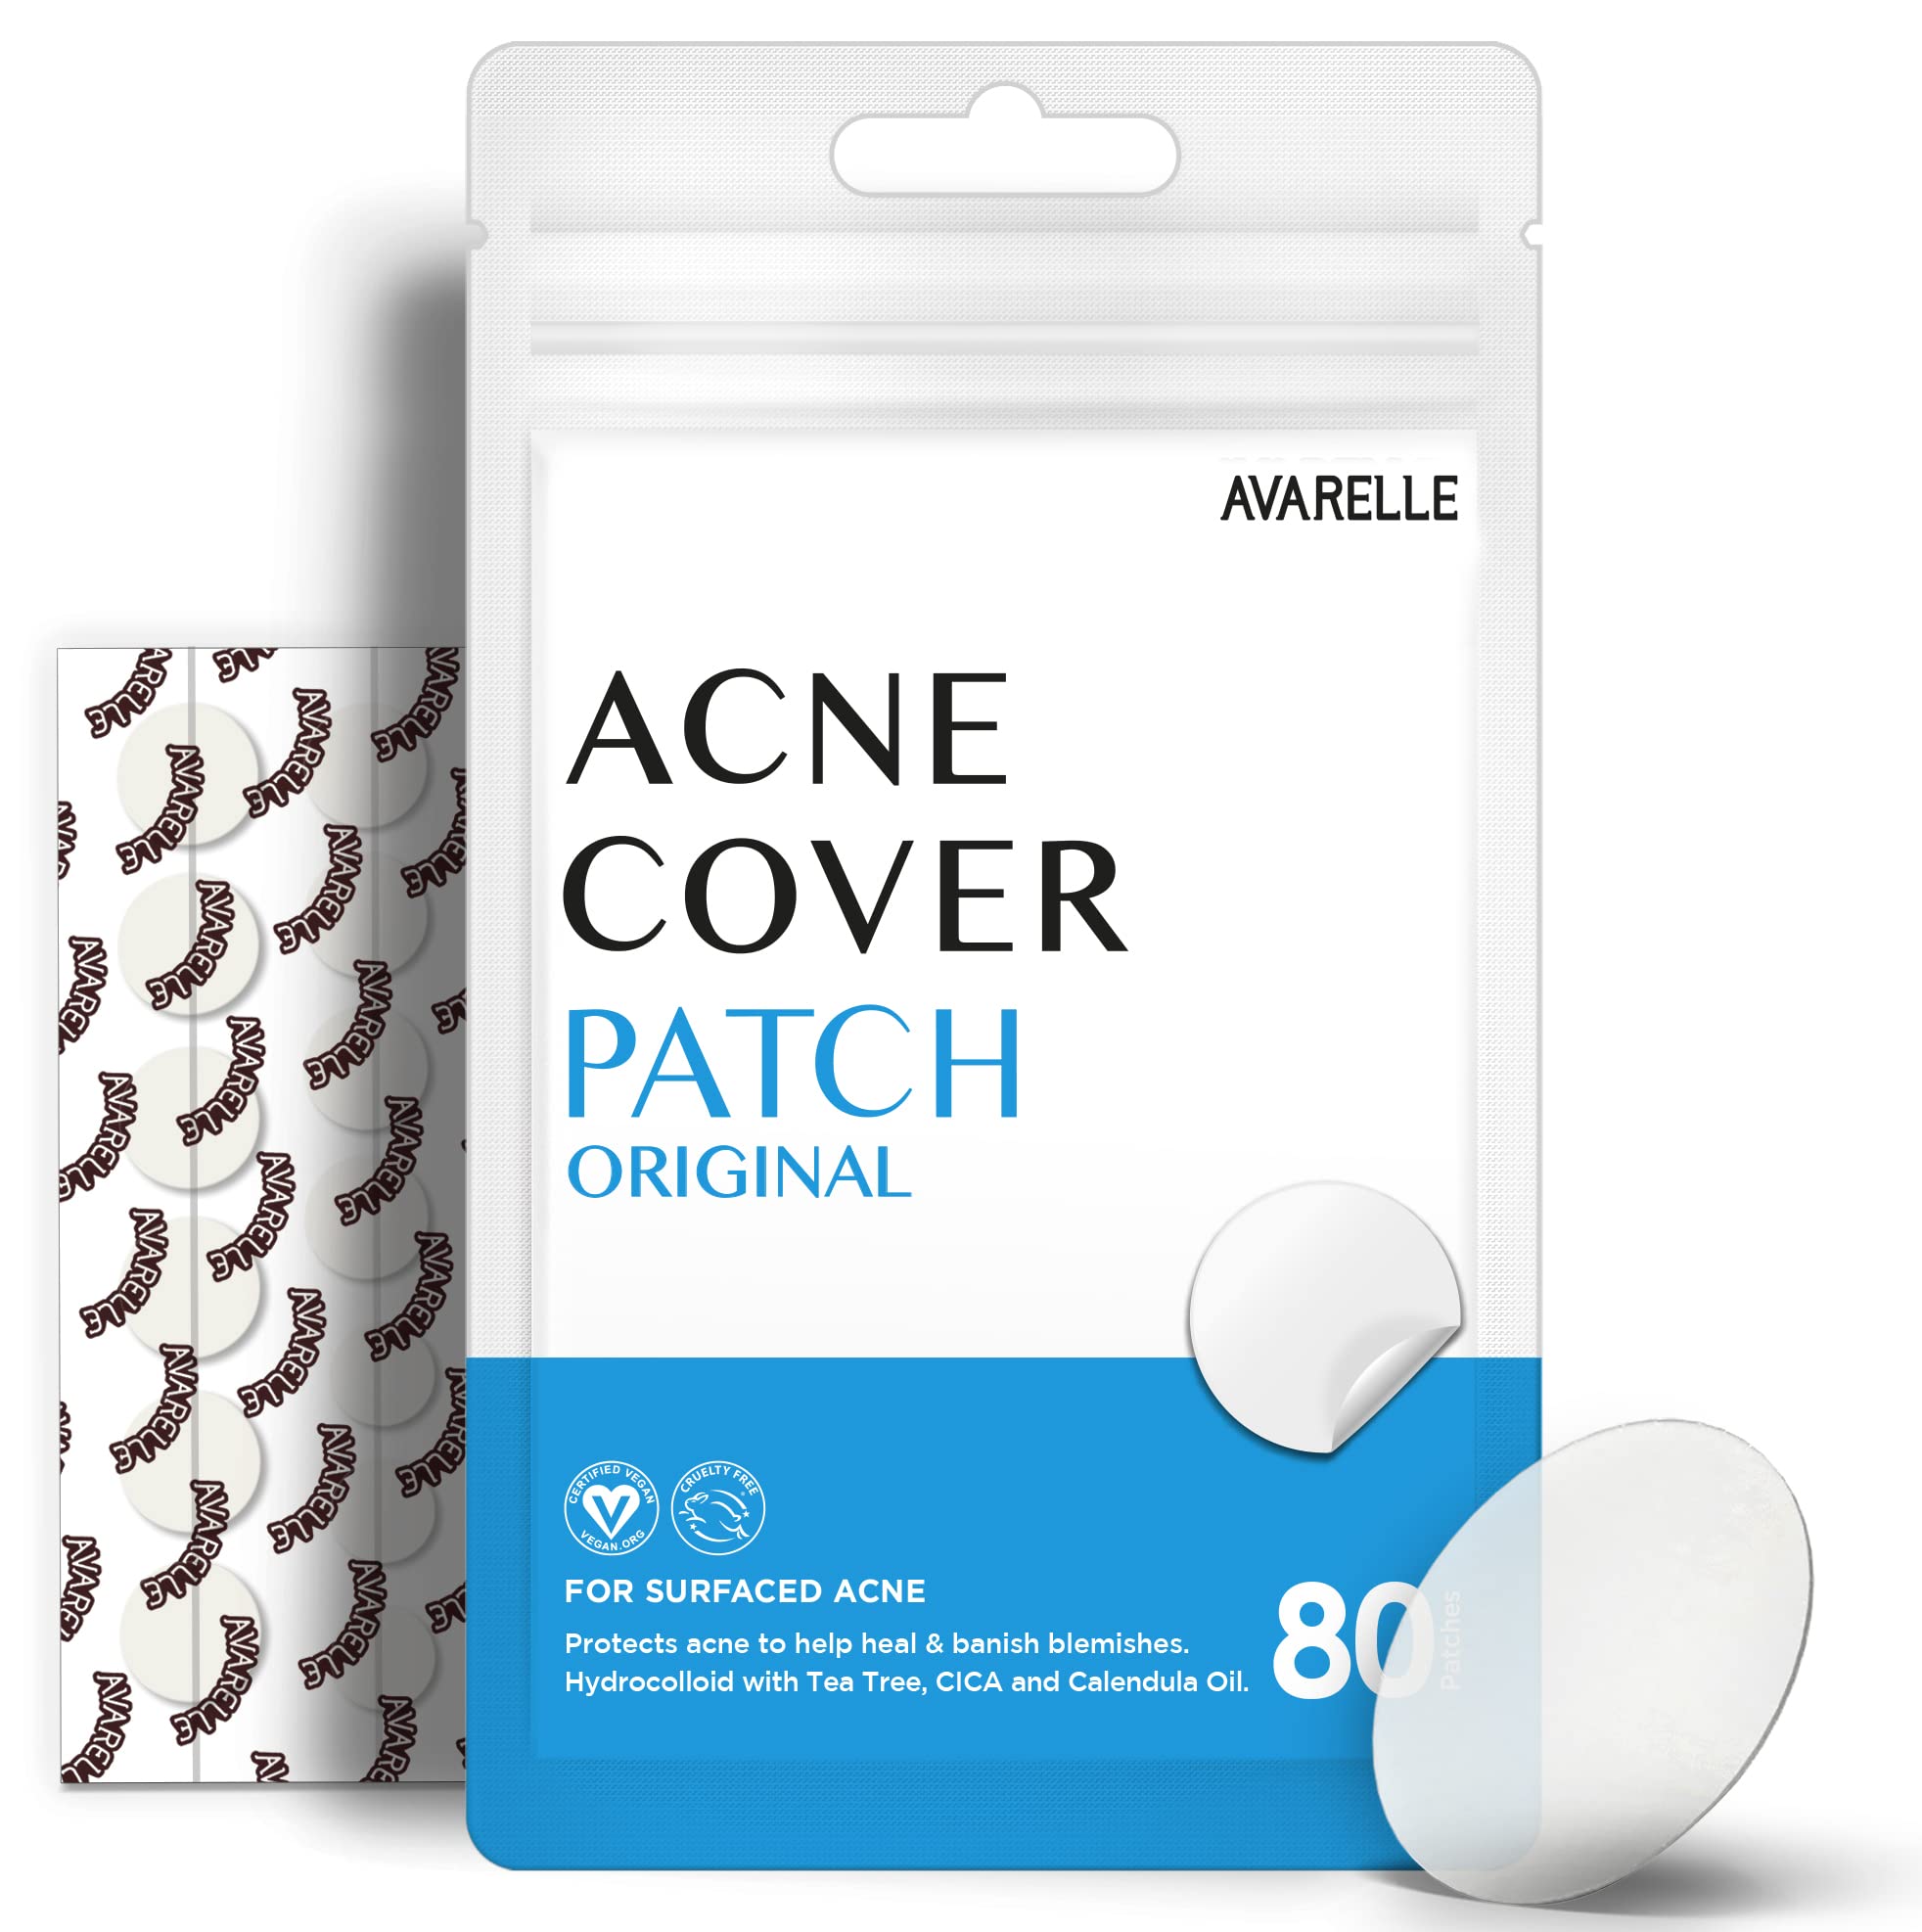 Book Cover Avarelle Pimple Patches (40 Count) Hydrocolloid Acne Cover Patches | Zit Patches for Blemishes, Zits and Breakouts with Tea Tree, Calendula and Cica Oil for Face | Vegan, Cruelty Free Certified, Carbonfree Certified (40 PATCHES) Medium (Pack of